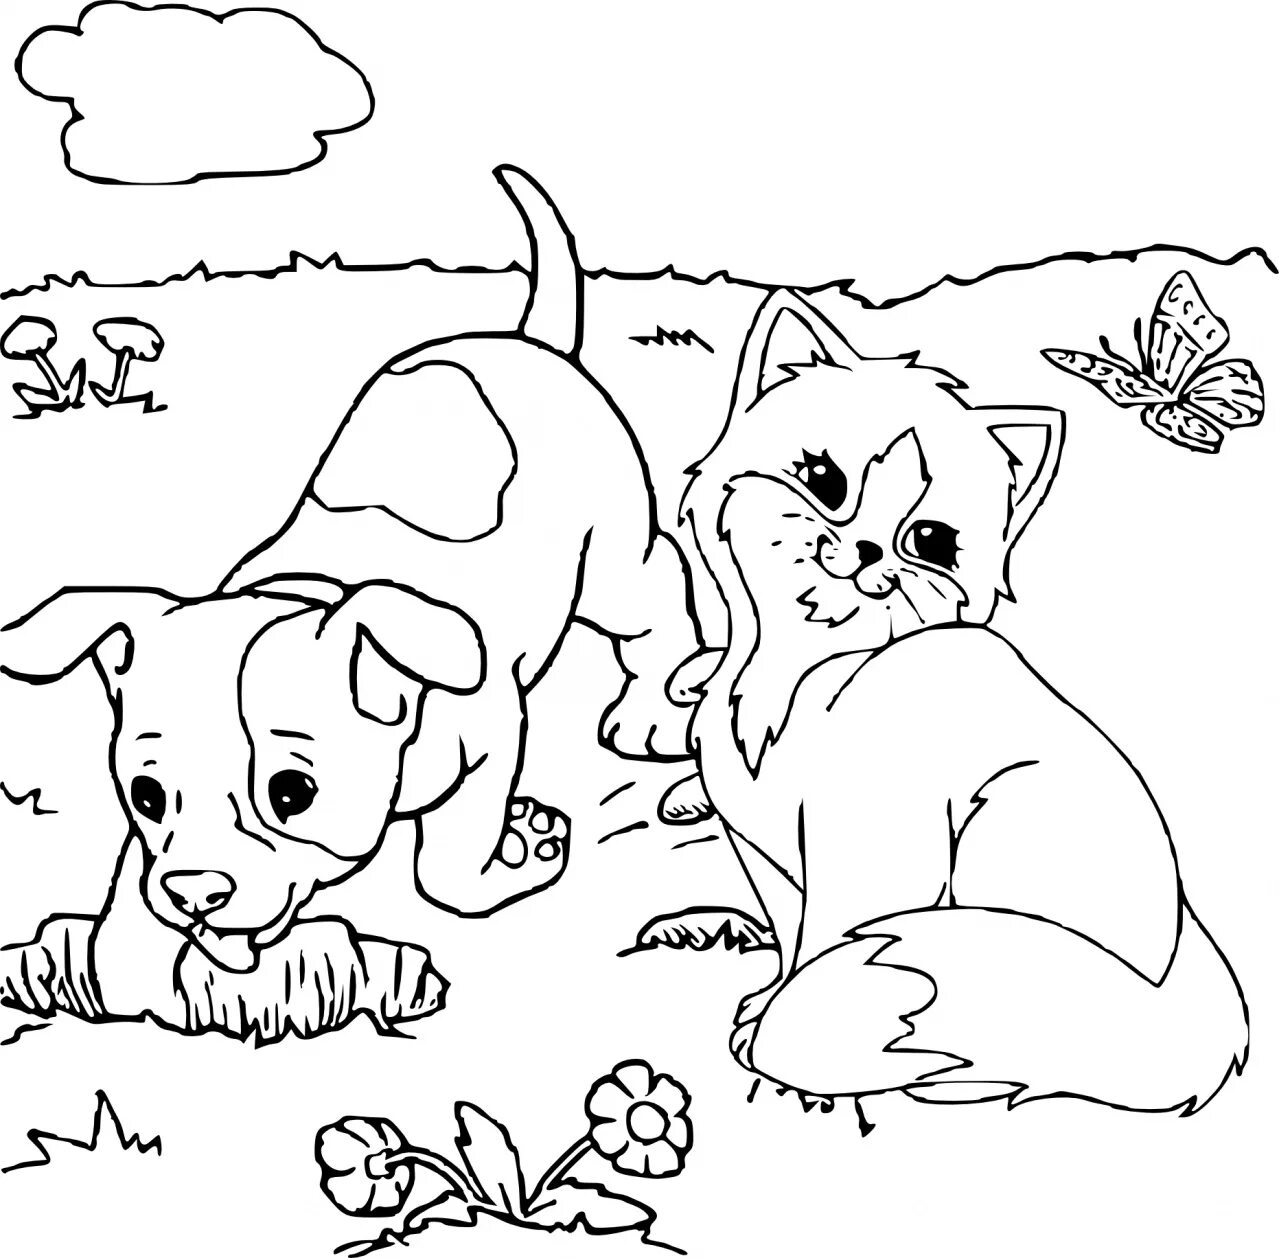 Cats and dogs for kids #1